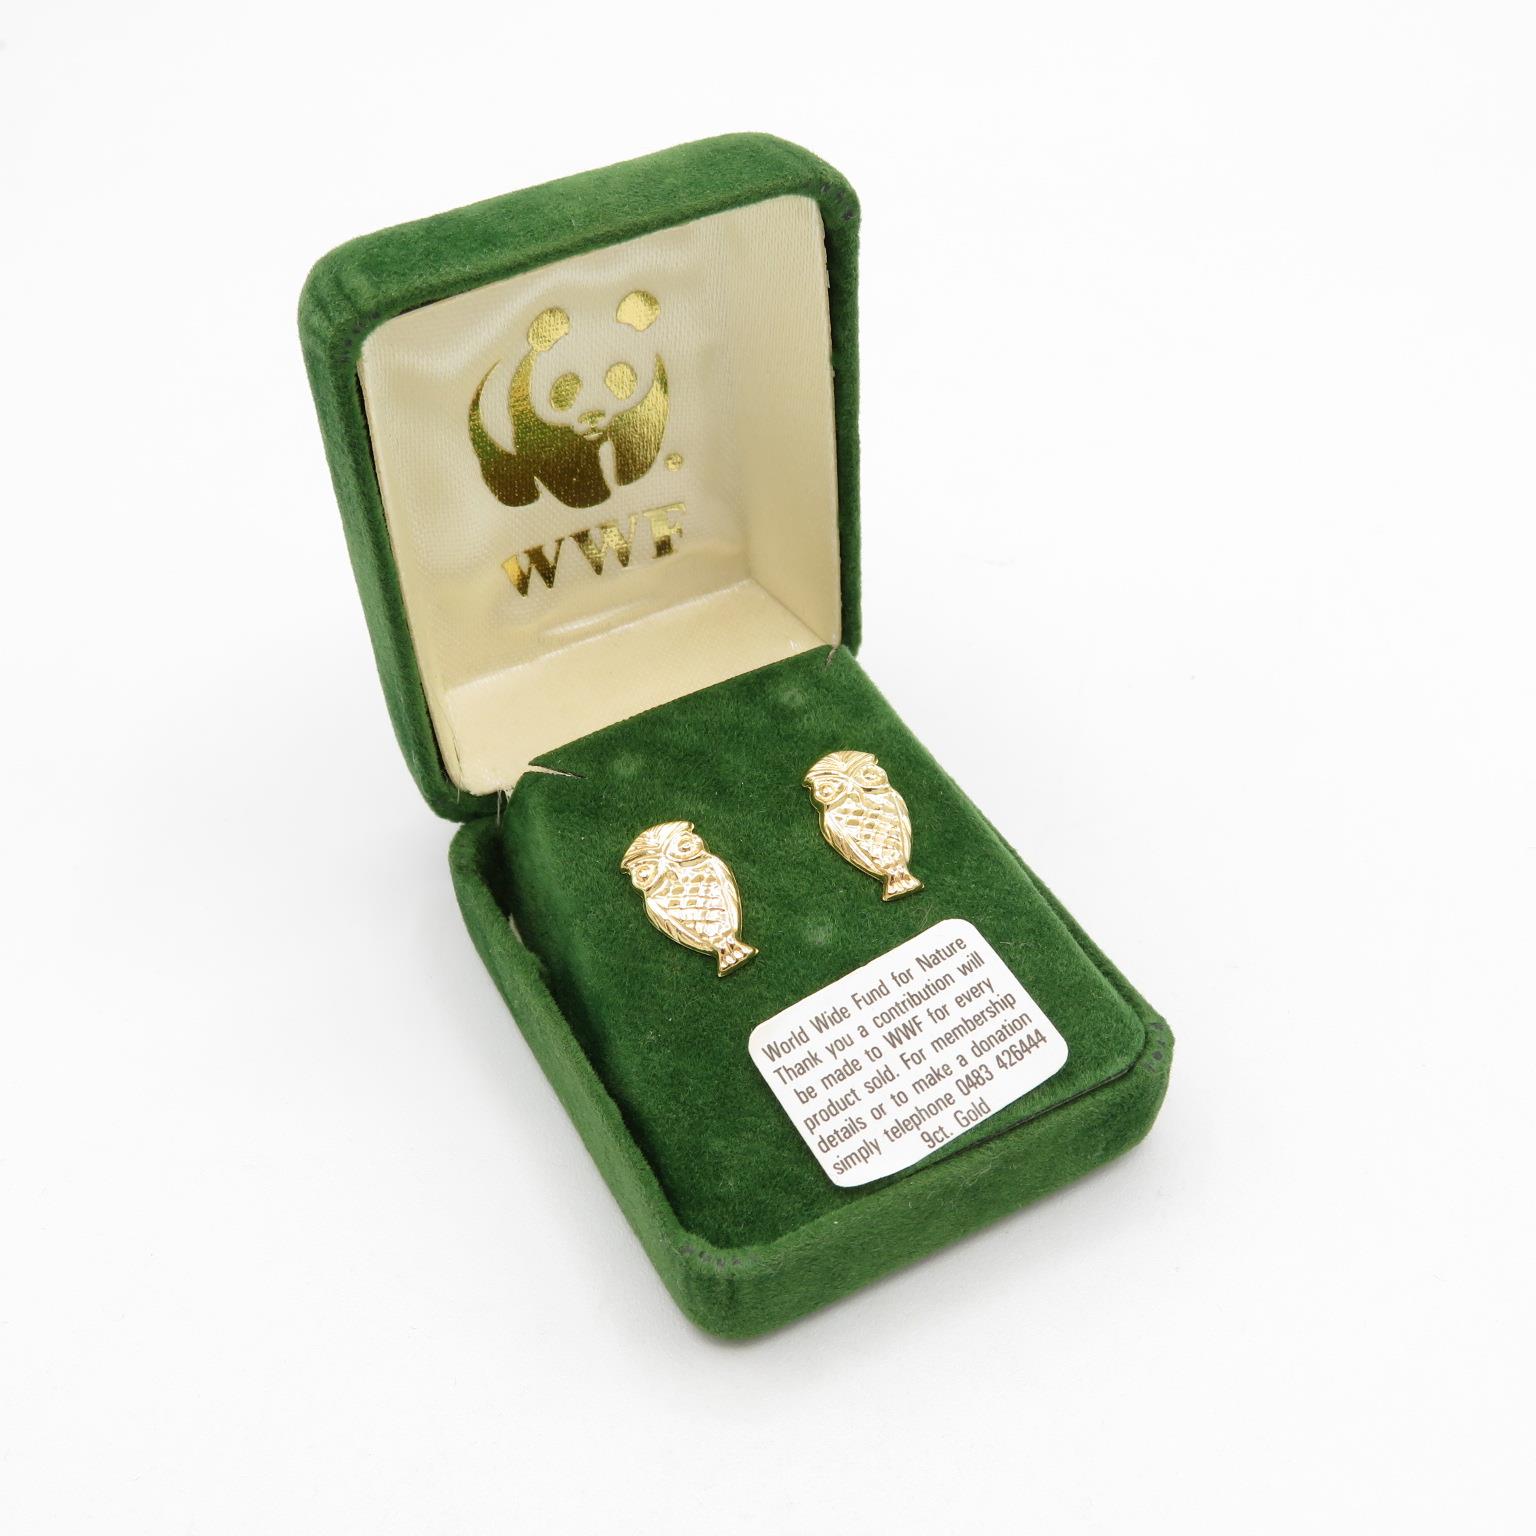 Boxed set of 9ct gold Owl earrings in WWF box - Image 2 of 4